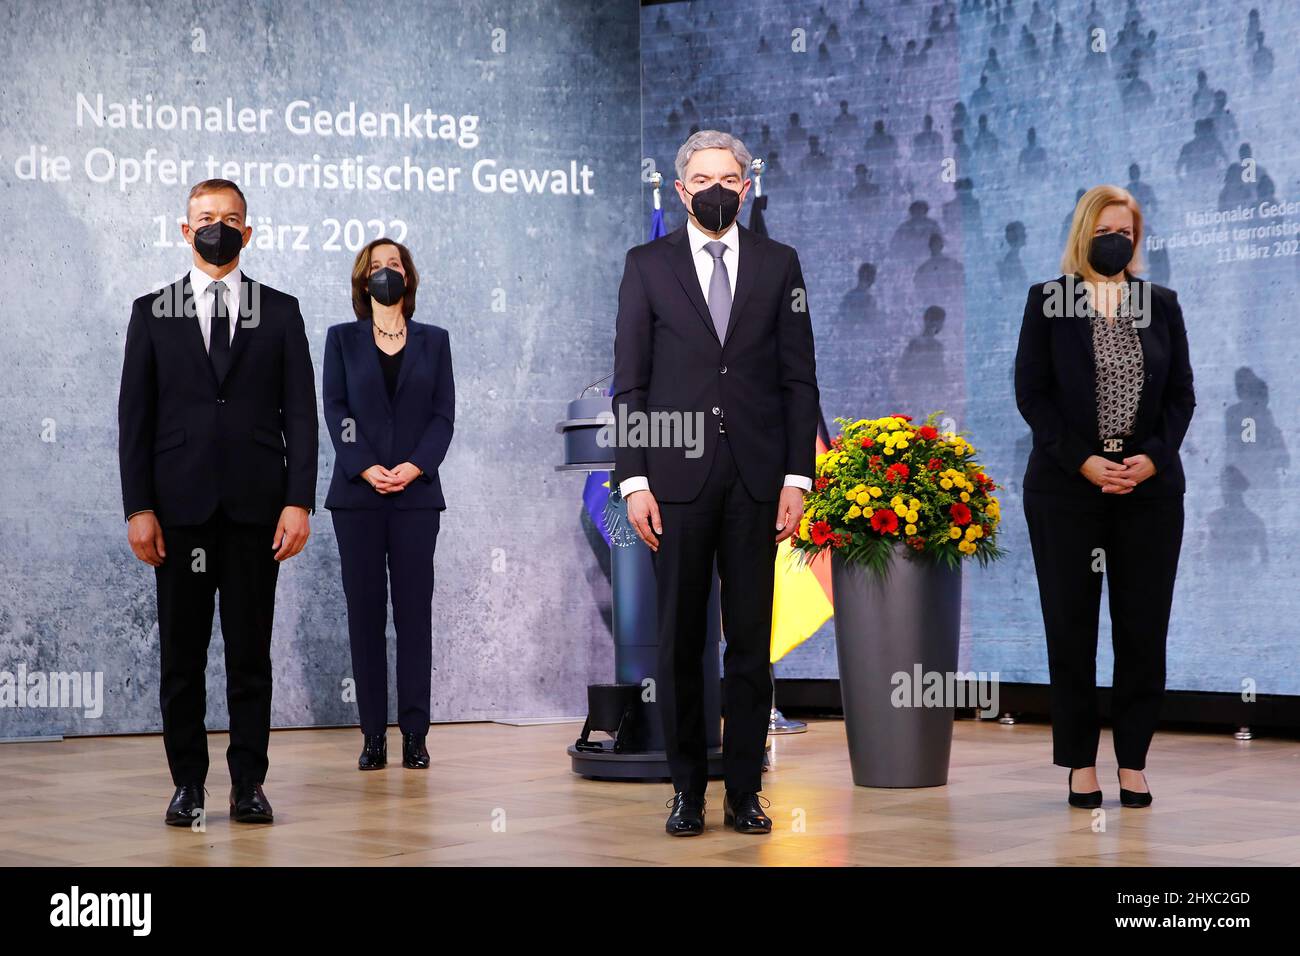 11 March 2022, Berlin: Pascal Kober (l-r), Federal Government Commissioner for the Concerns of Victims of Terrorist and Extremist Attacks in Germany, Petra Terhoeven, historian, Stephan Harbarth, President of the Federal Constitutional Court, and Nancy Faeser (SPD), Federal Minister of the Interior and Home Affairs, stand during the minute's silence at the German government's commemoration of the victims of terrorist violence. The Day of Remembrance, which is to be held annually on March 11, ties in at the national level with the European Day of Remembrance, which was established after the Mad Stock Photo